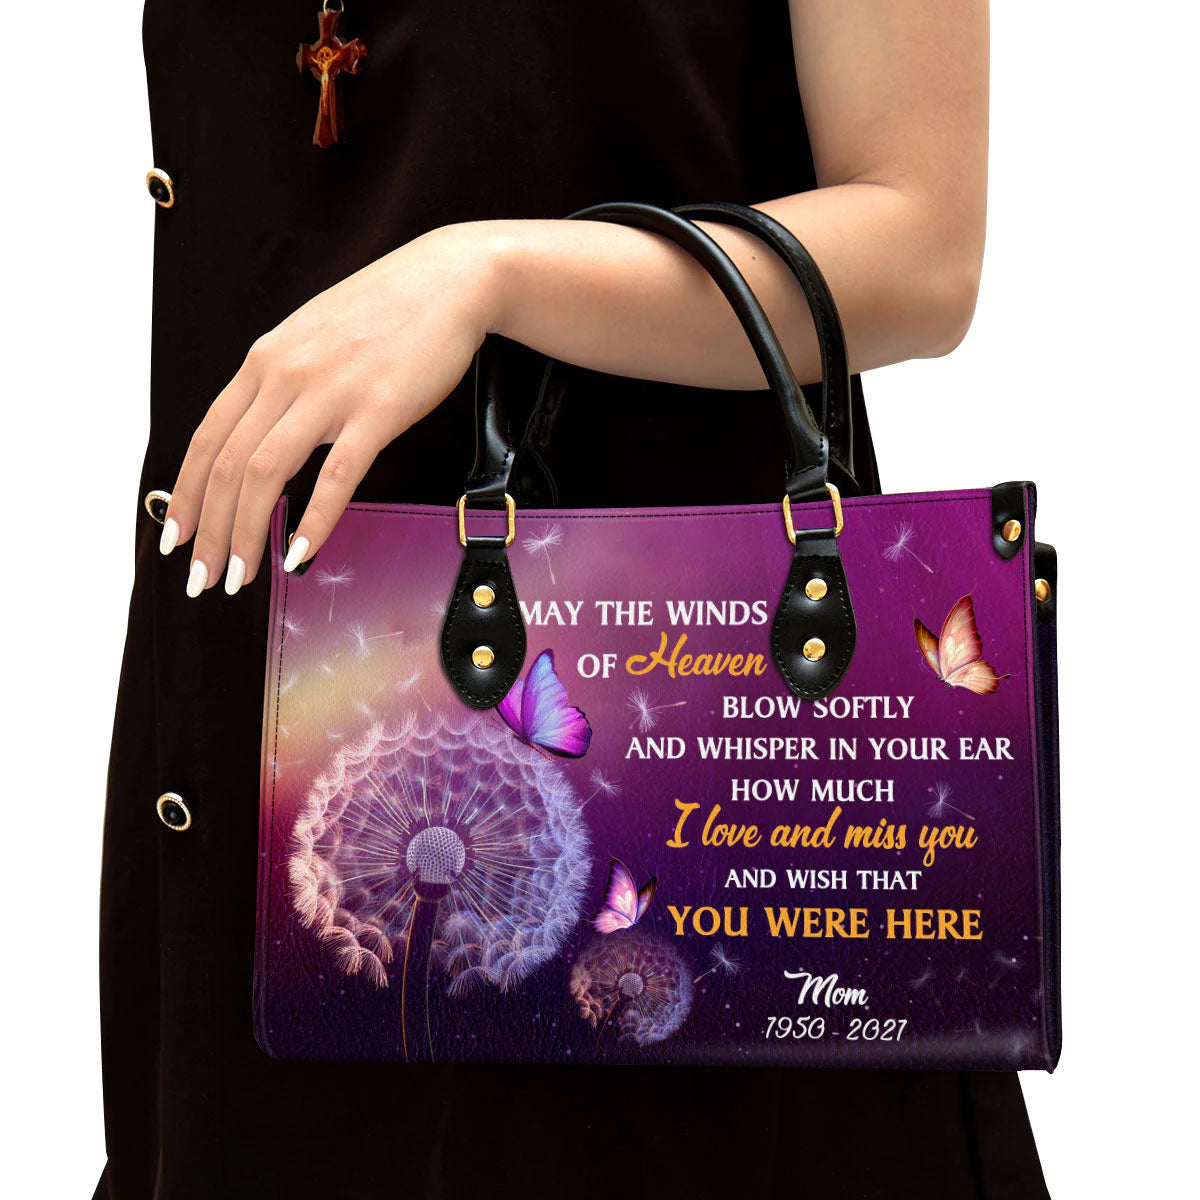 Christianartbag Handbags, I Love And Miss You Memorial Leather Bags, Personalized Bags, Gifts for Women, Christmas Gift, CABLTB01300723. - Christian Art Bag